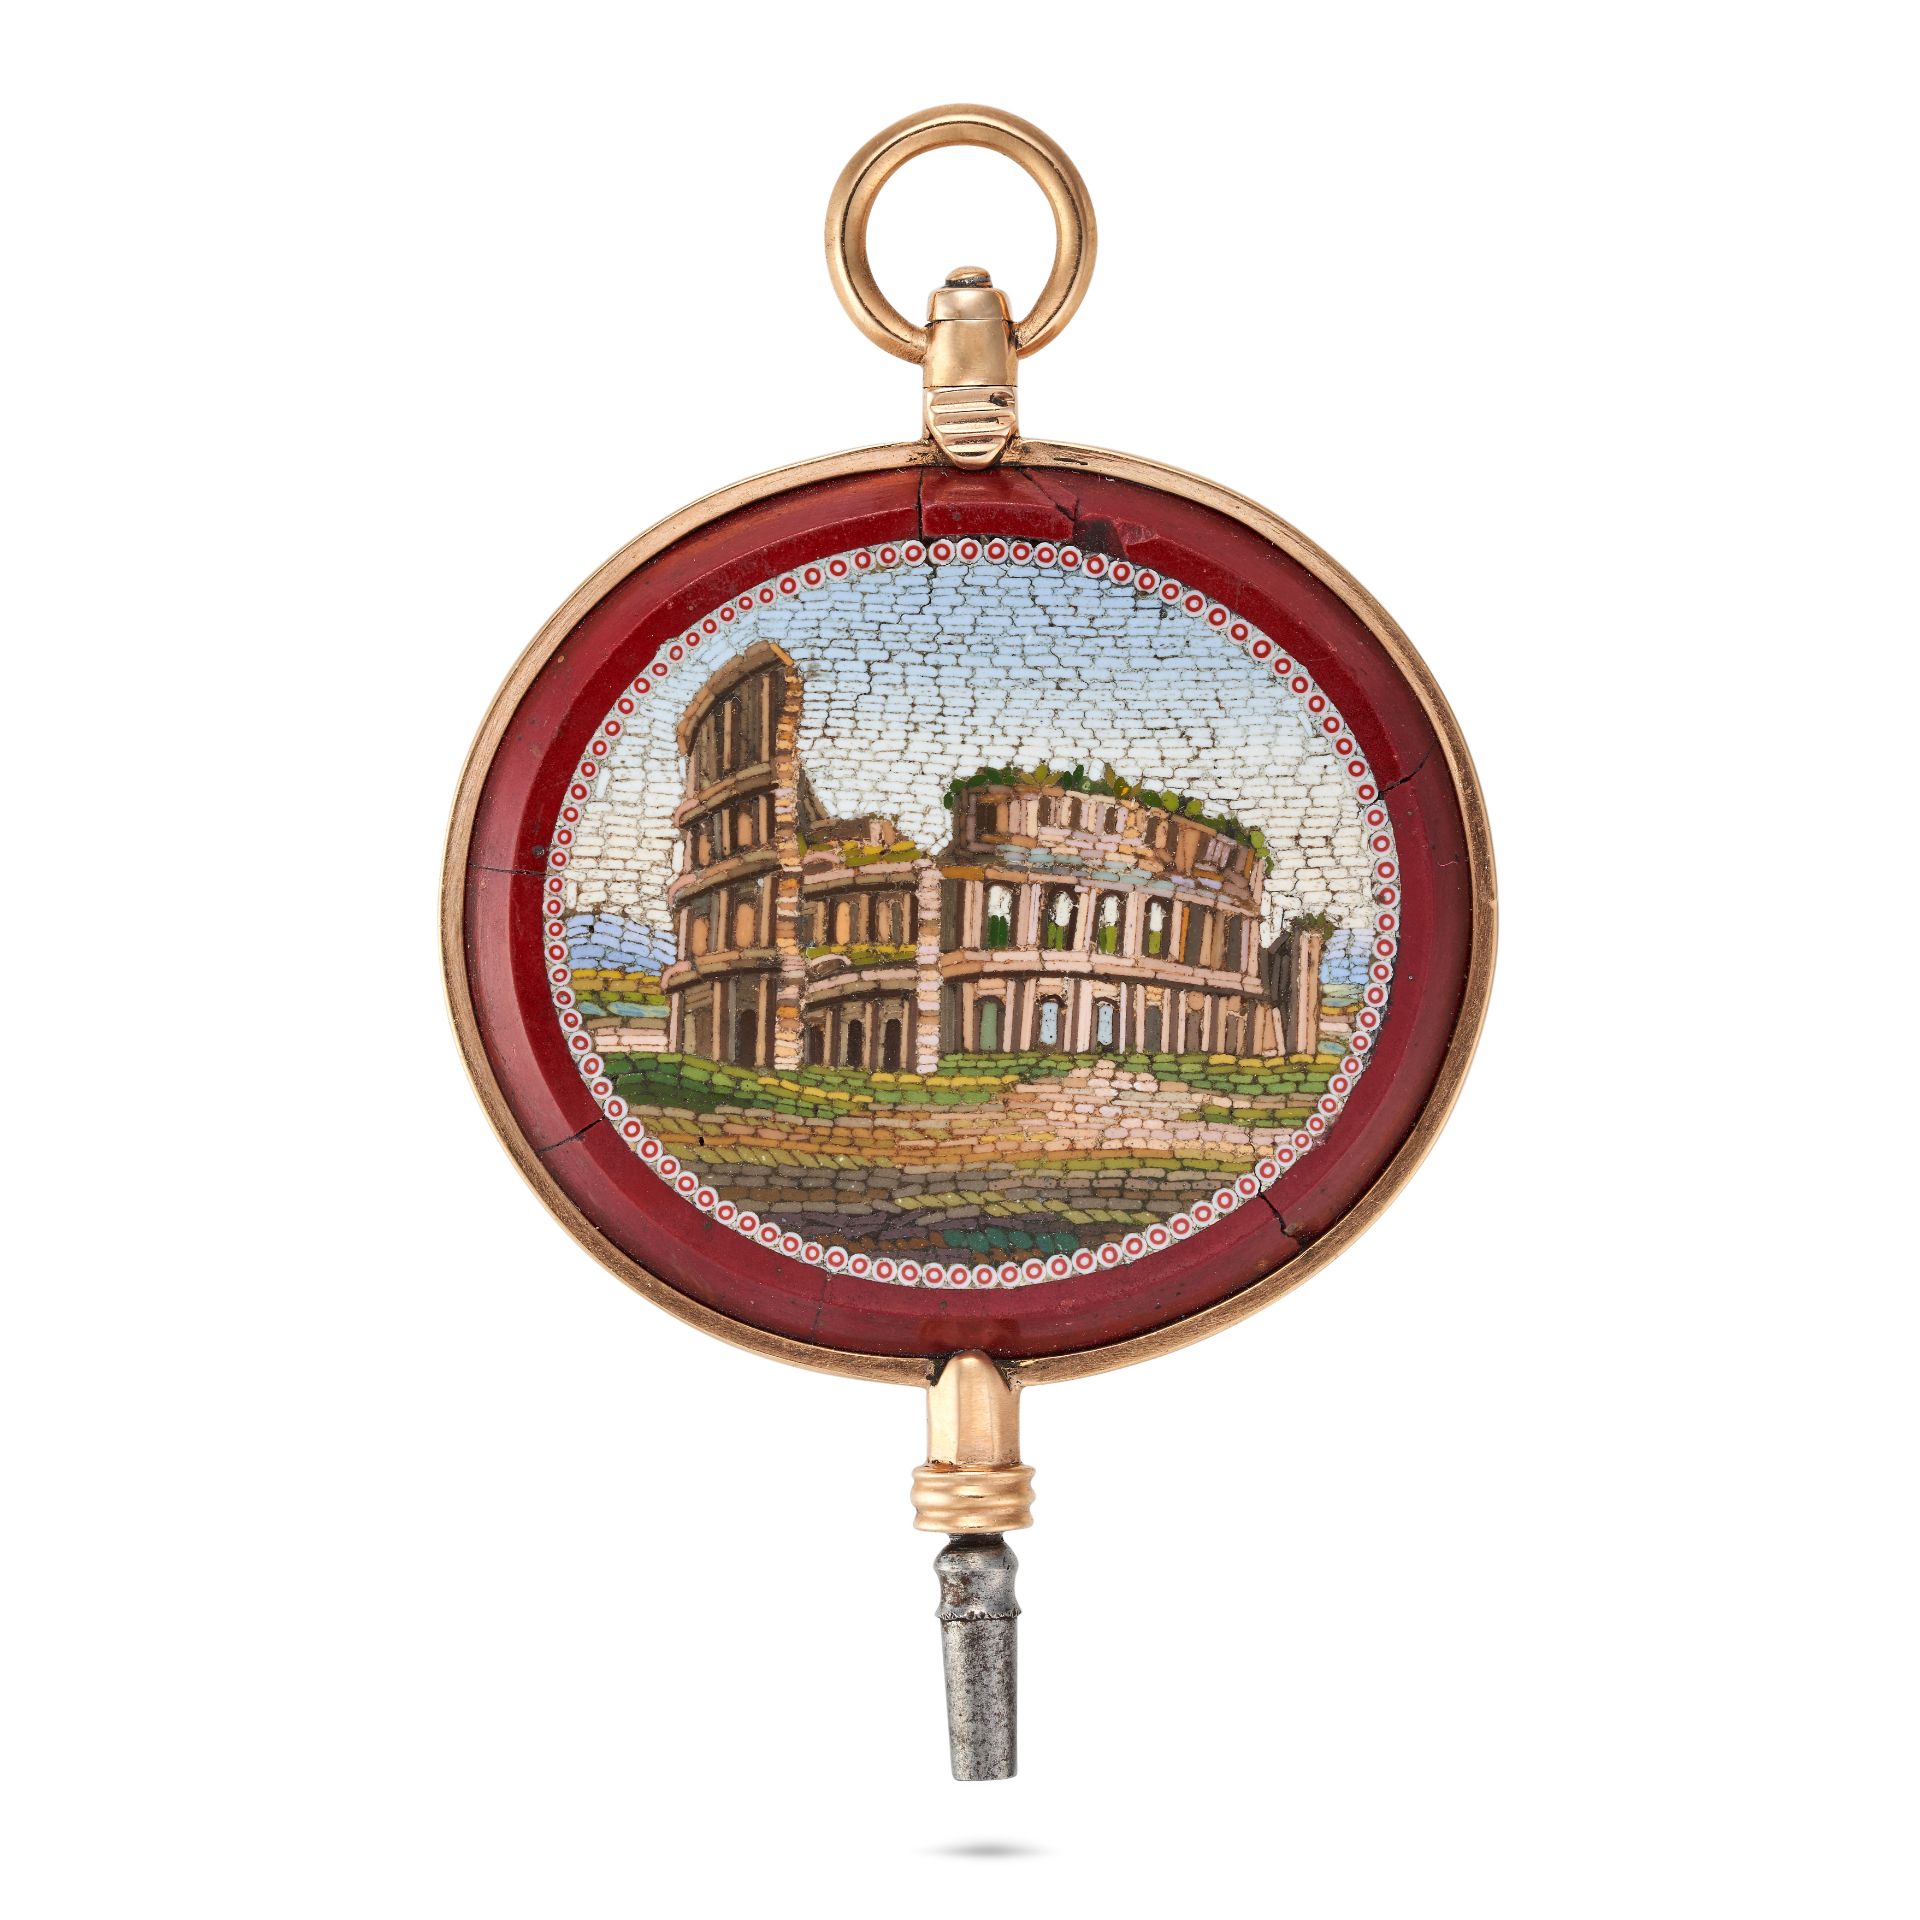 AN ANTIQUE MICROMOSAIC WATCH KEY inlaid with variously coloured pieces of glass depicting the Col...